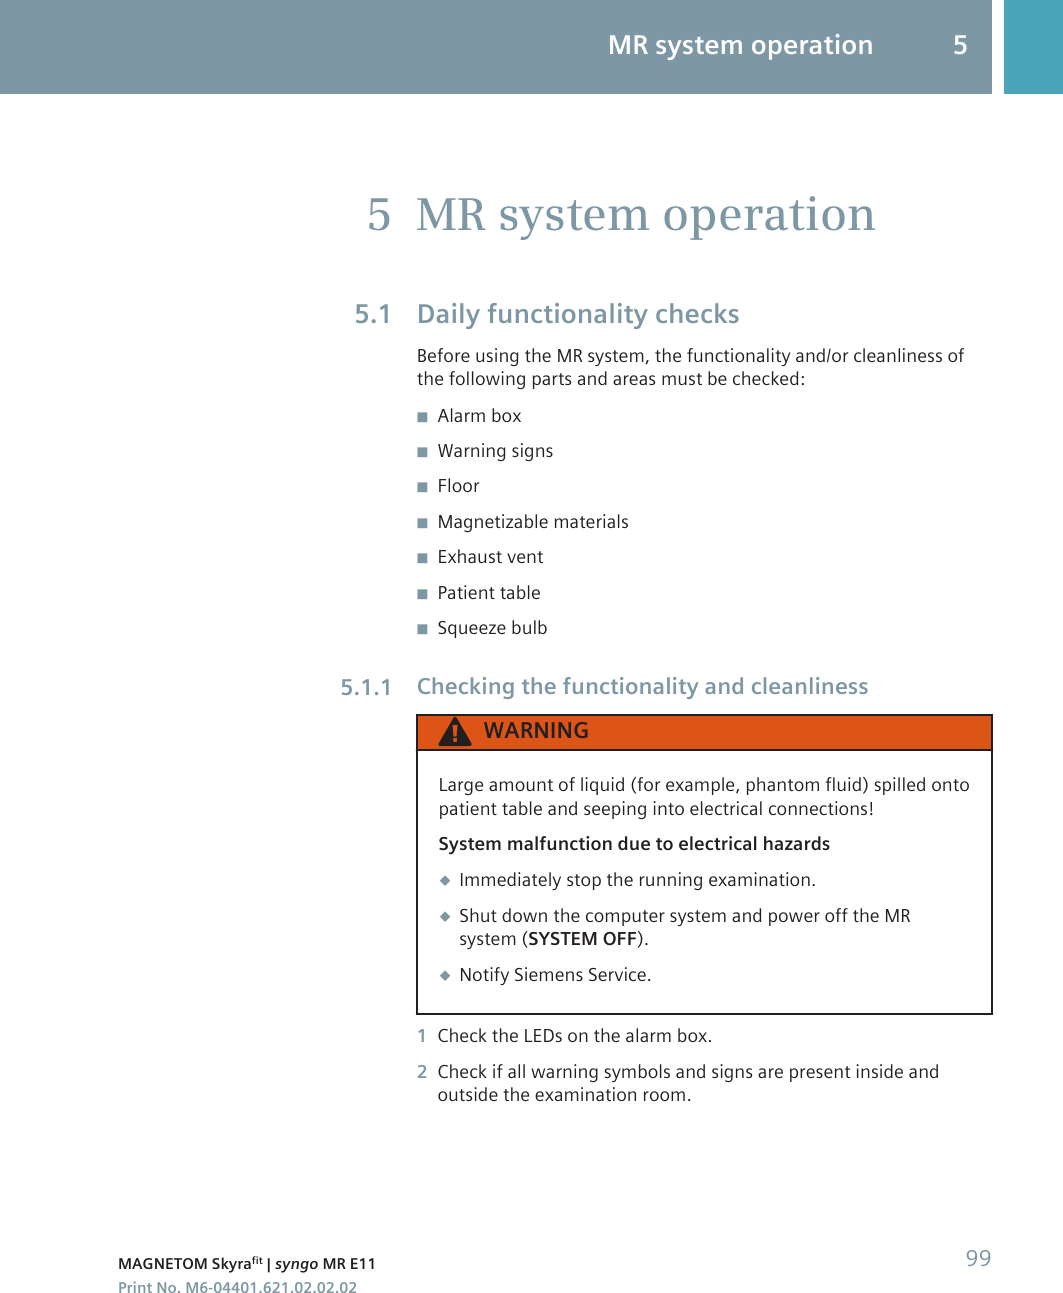 MR system operationDaily functionality checksBefore using the MR system, the functionality and/or cleanliness ofthe following parts and areas must be checked:◾Alarm box◾Warning signs◾Floor◾Magnetizable materials◾Exhaust vent◾Patient table◾Squeeze bulbChecking the functionality and cleanlinessWARNINGLarge amount of liquid (for example, phantom fluid) spilled ontopatient table and seeping into electrical connections!System malfunction due to electrical hazards◆Immediately stop the running examination.◆Shut down the computer system and power off the MRsystem (SYSTEM OFF).◆Notify Siemens Service.1Check the LEDs on the alarm box.2Check if all warning symbols and signs are present inside andoutside the examination room.55.15.1.1MR system operation 5MAGNETOM Skyrafit | syngo MR E11 99Print No. M6-04401.621.02.02.02